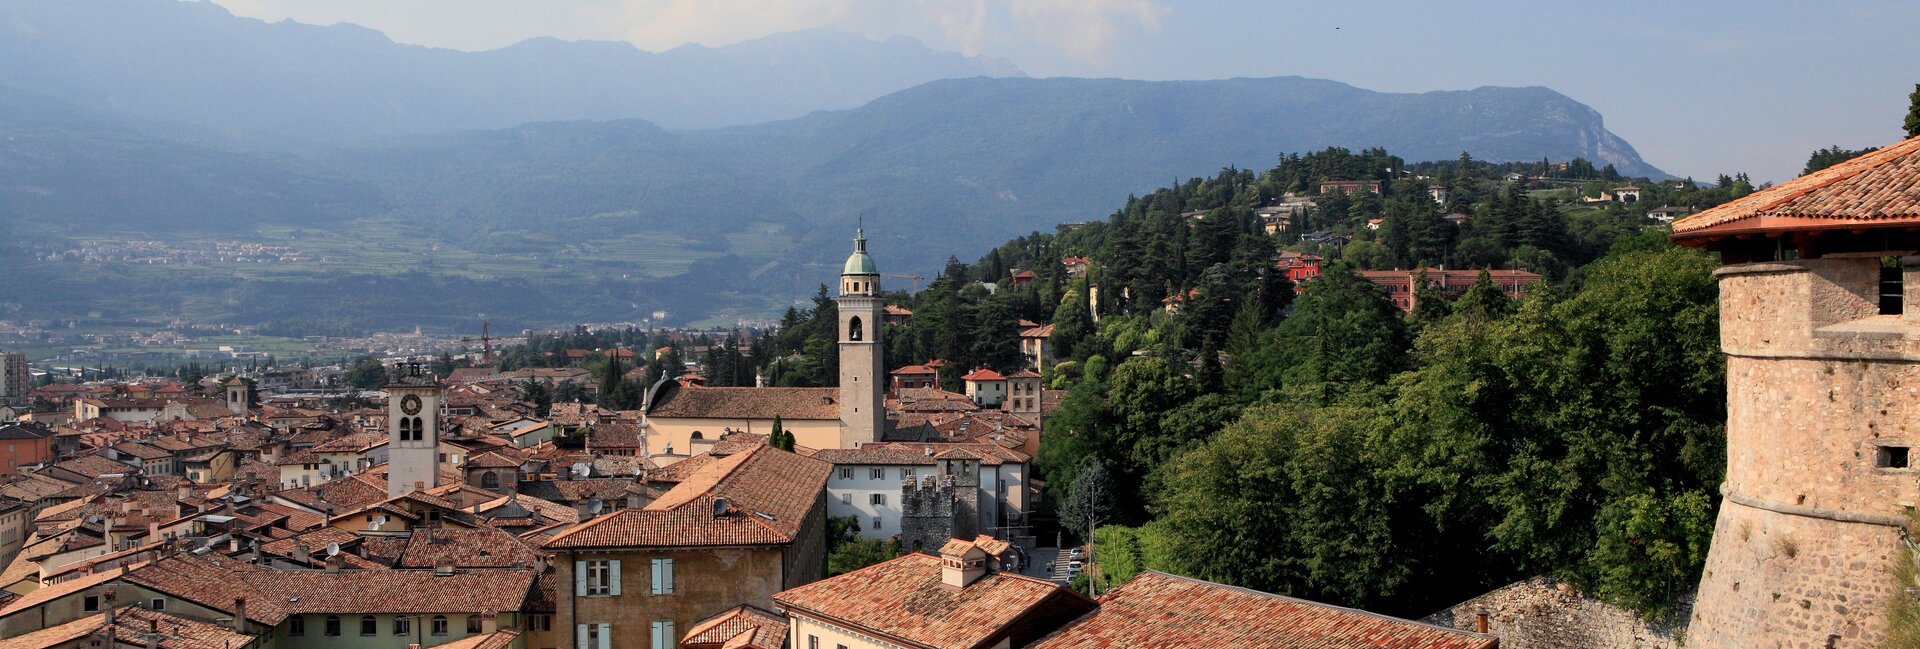 Historical places to visit in September and October in Rovereto, Trentino, North Italy